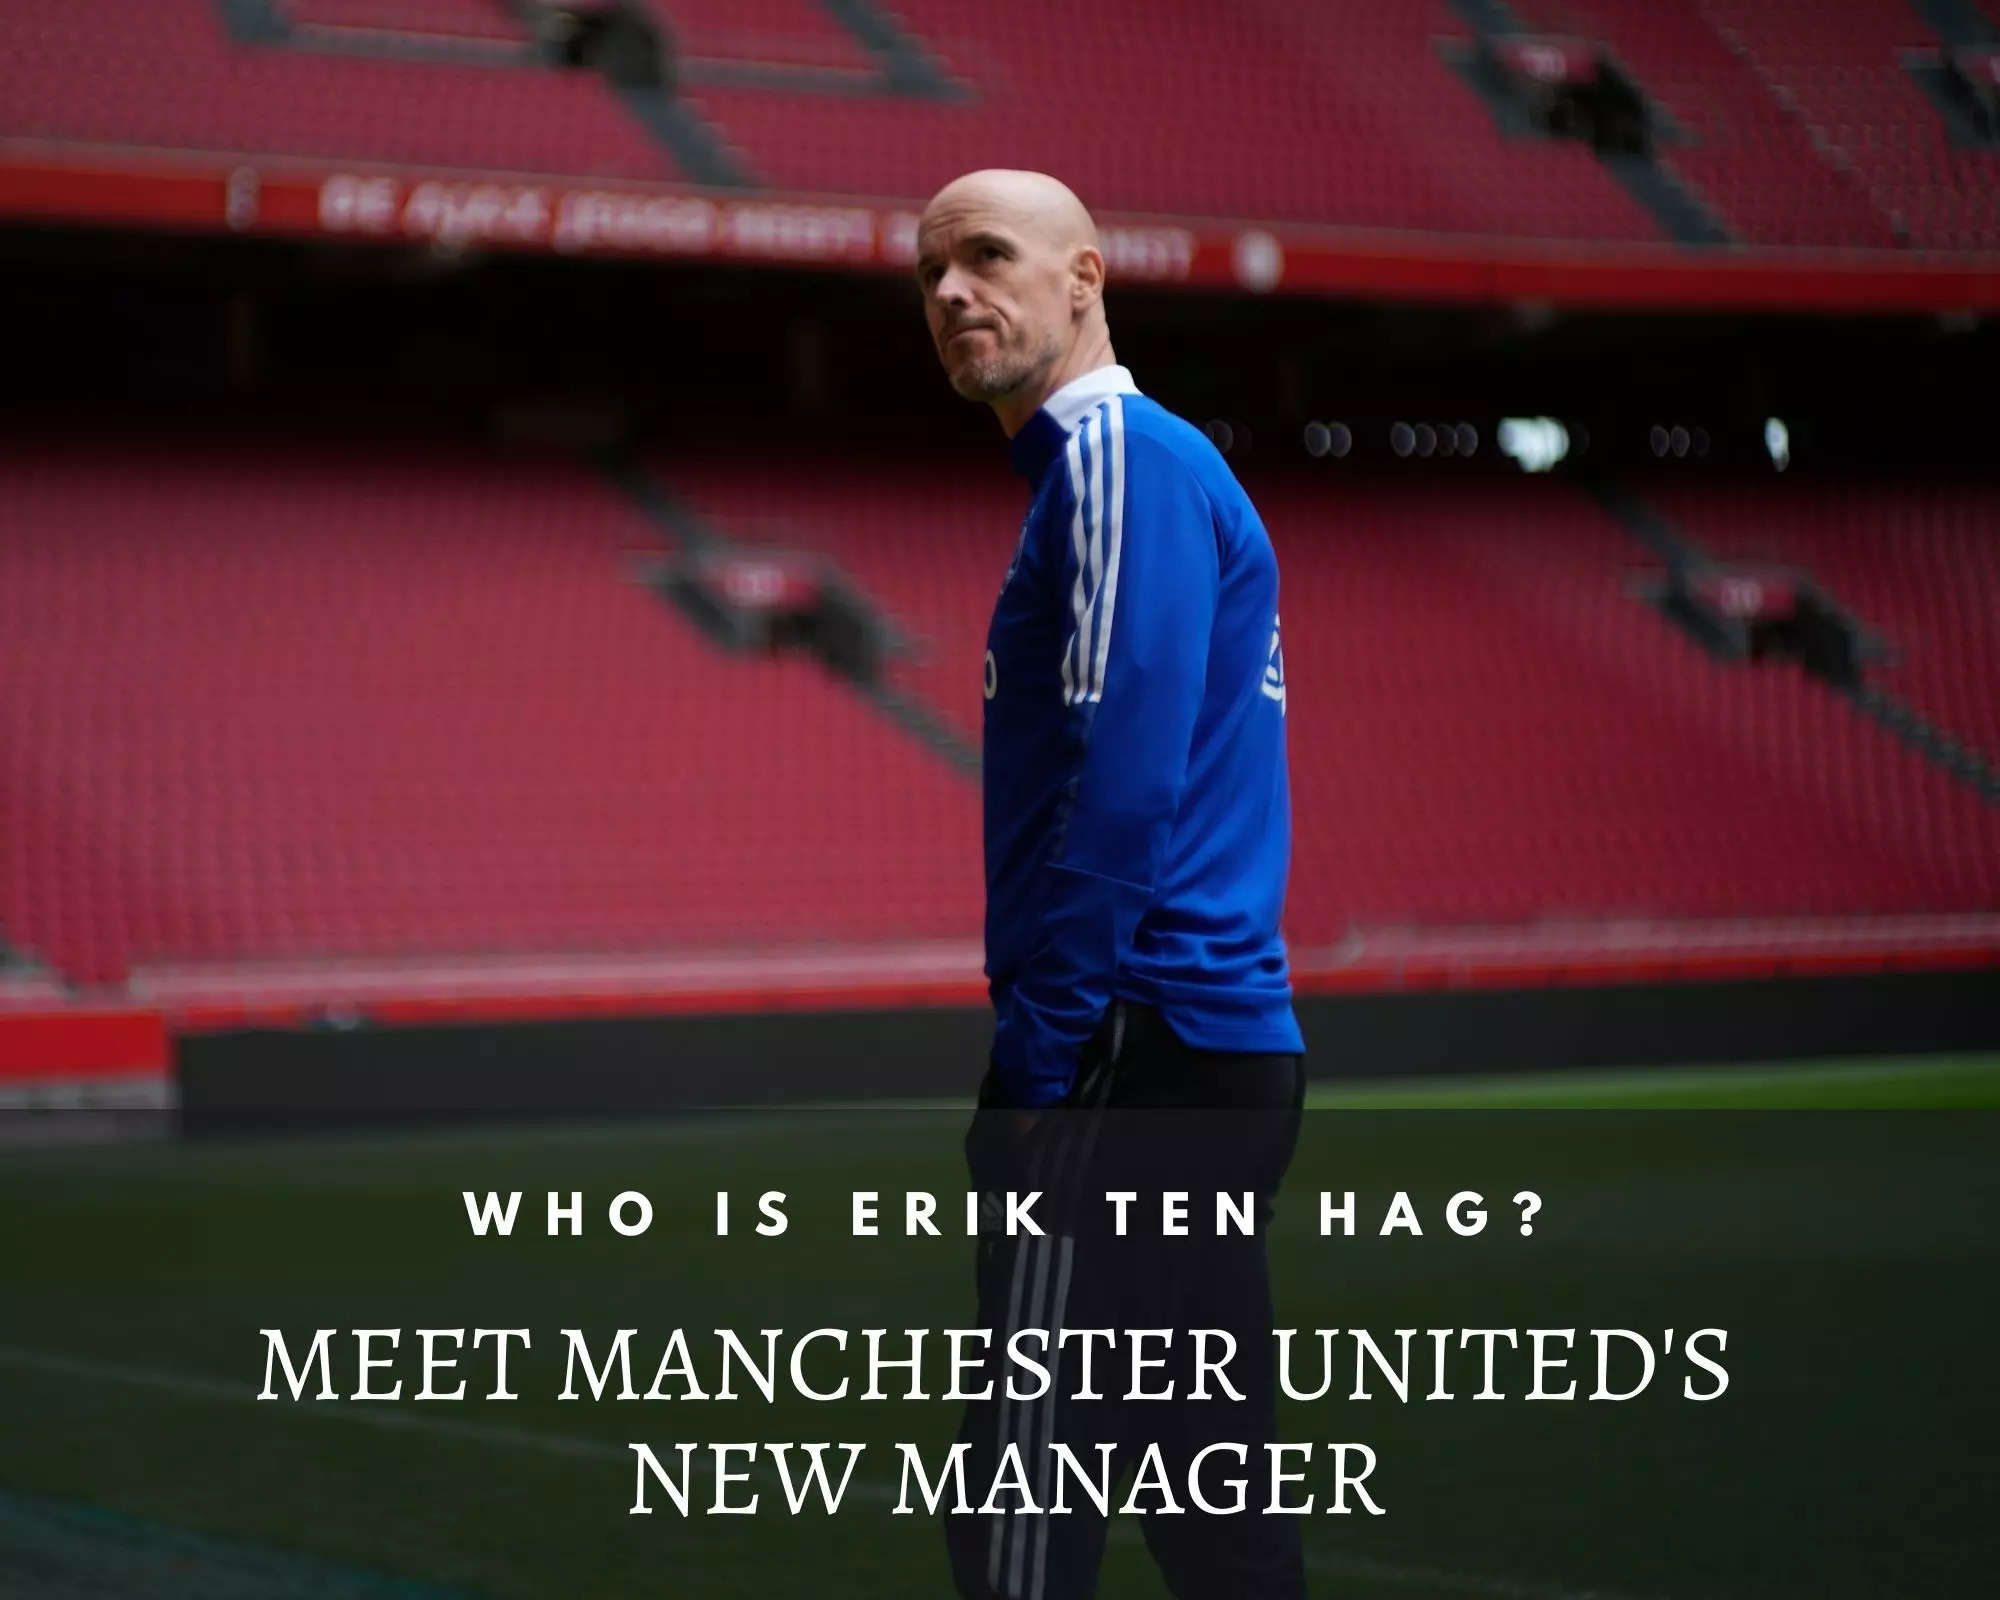 Who is Erik ten Hag? All you need to know about Manchester United's newly appointed manager